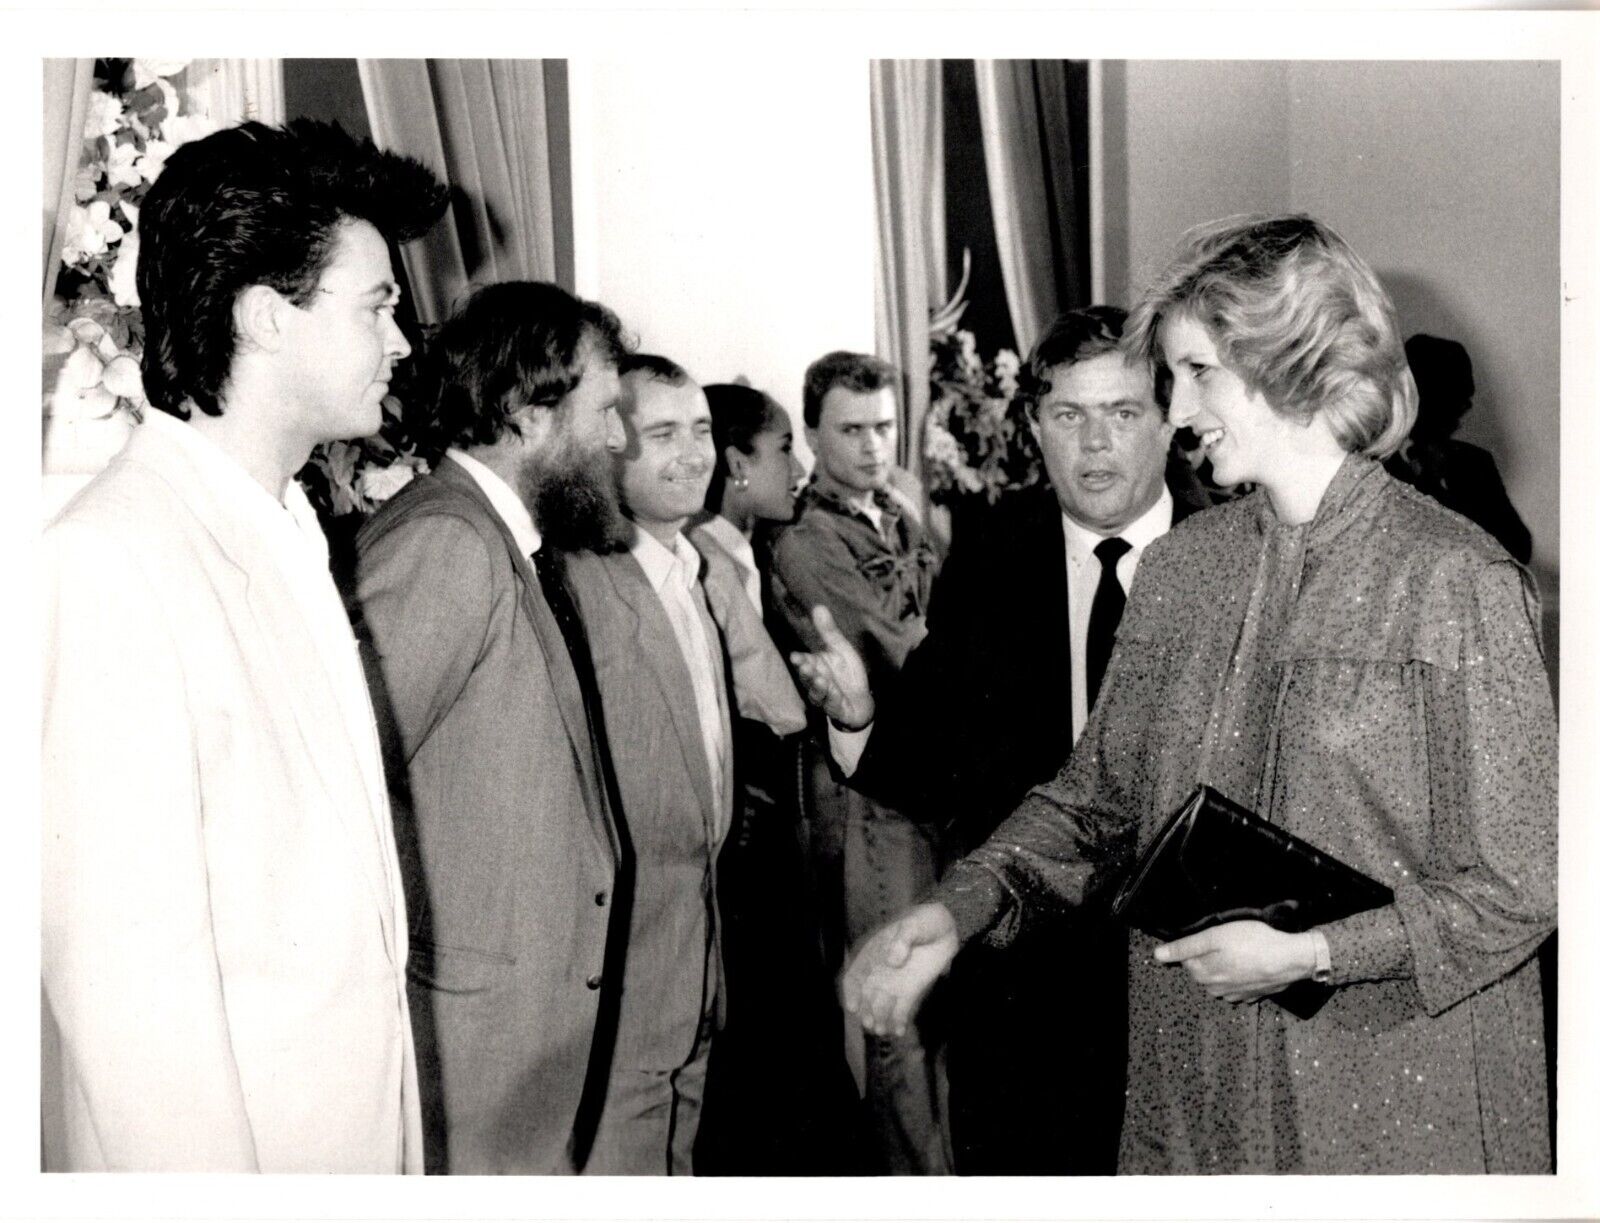 PRINCES DIANA MEETS THAT OTHER ROYAL FAMILY - ROCK STAR PAUL YOUNG JUNE 15 1984